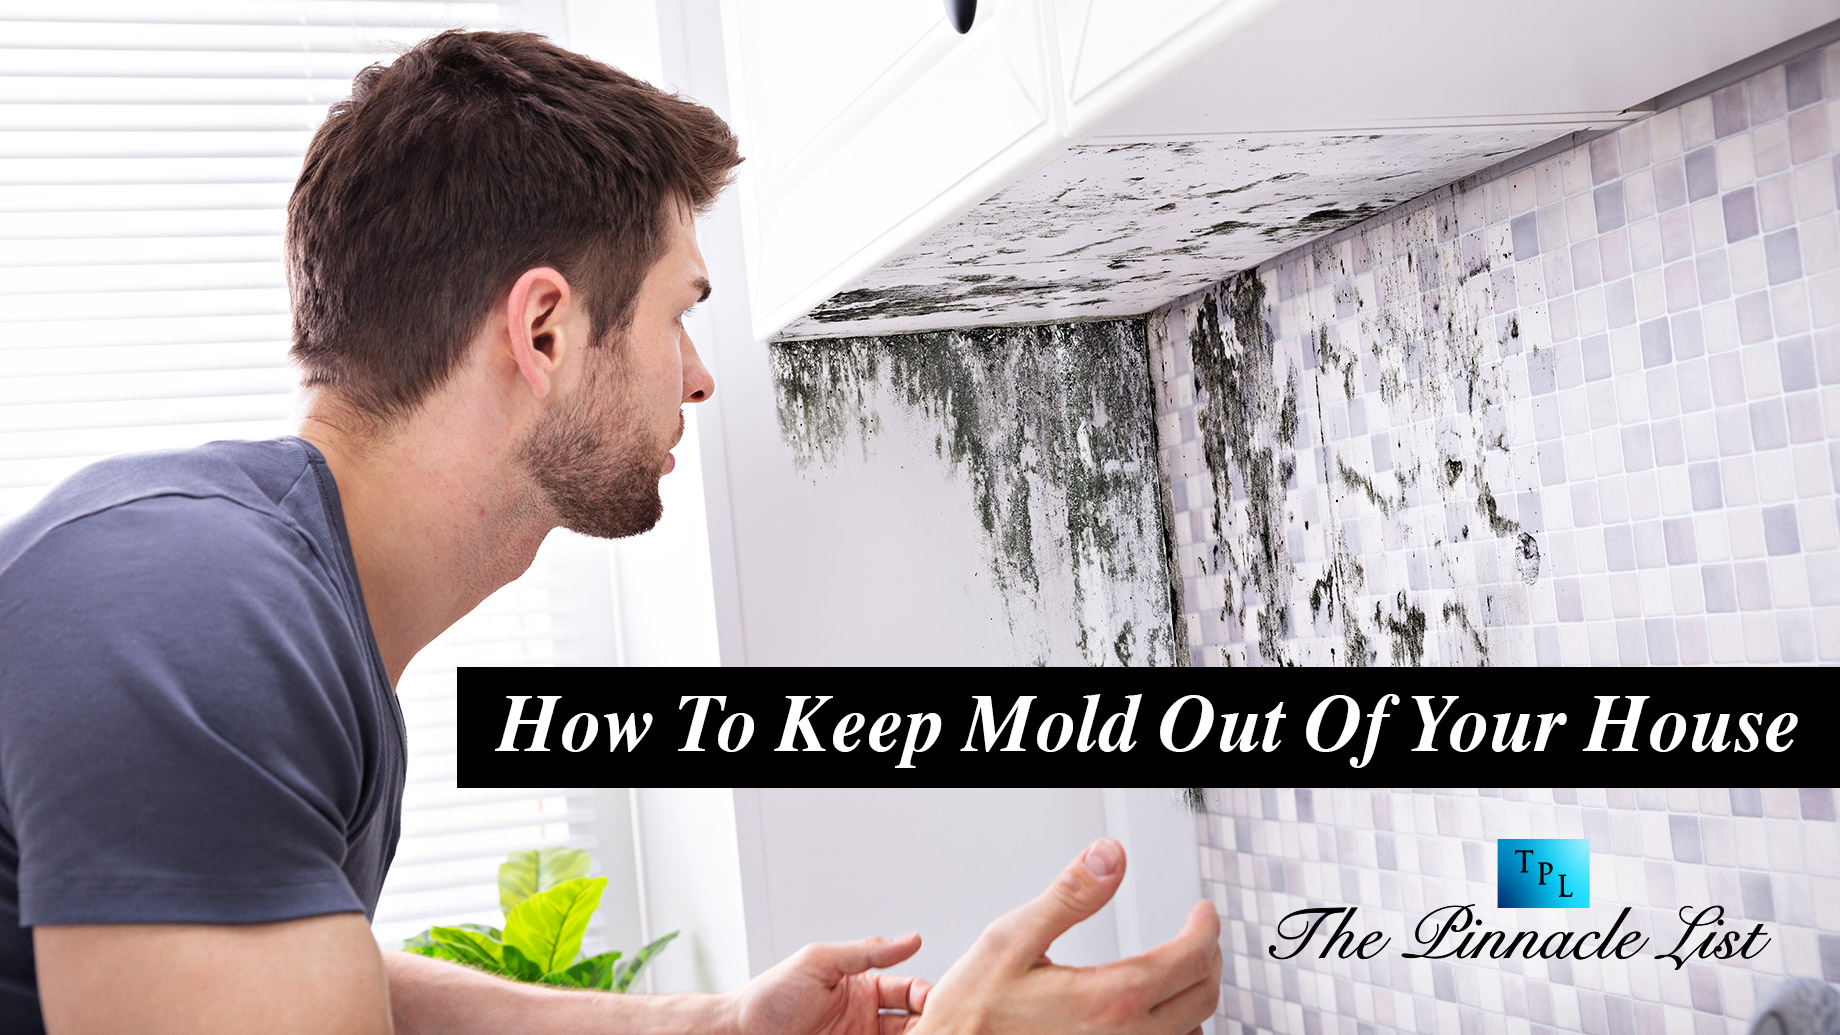 How To Keep Mold Out Of Your House